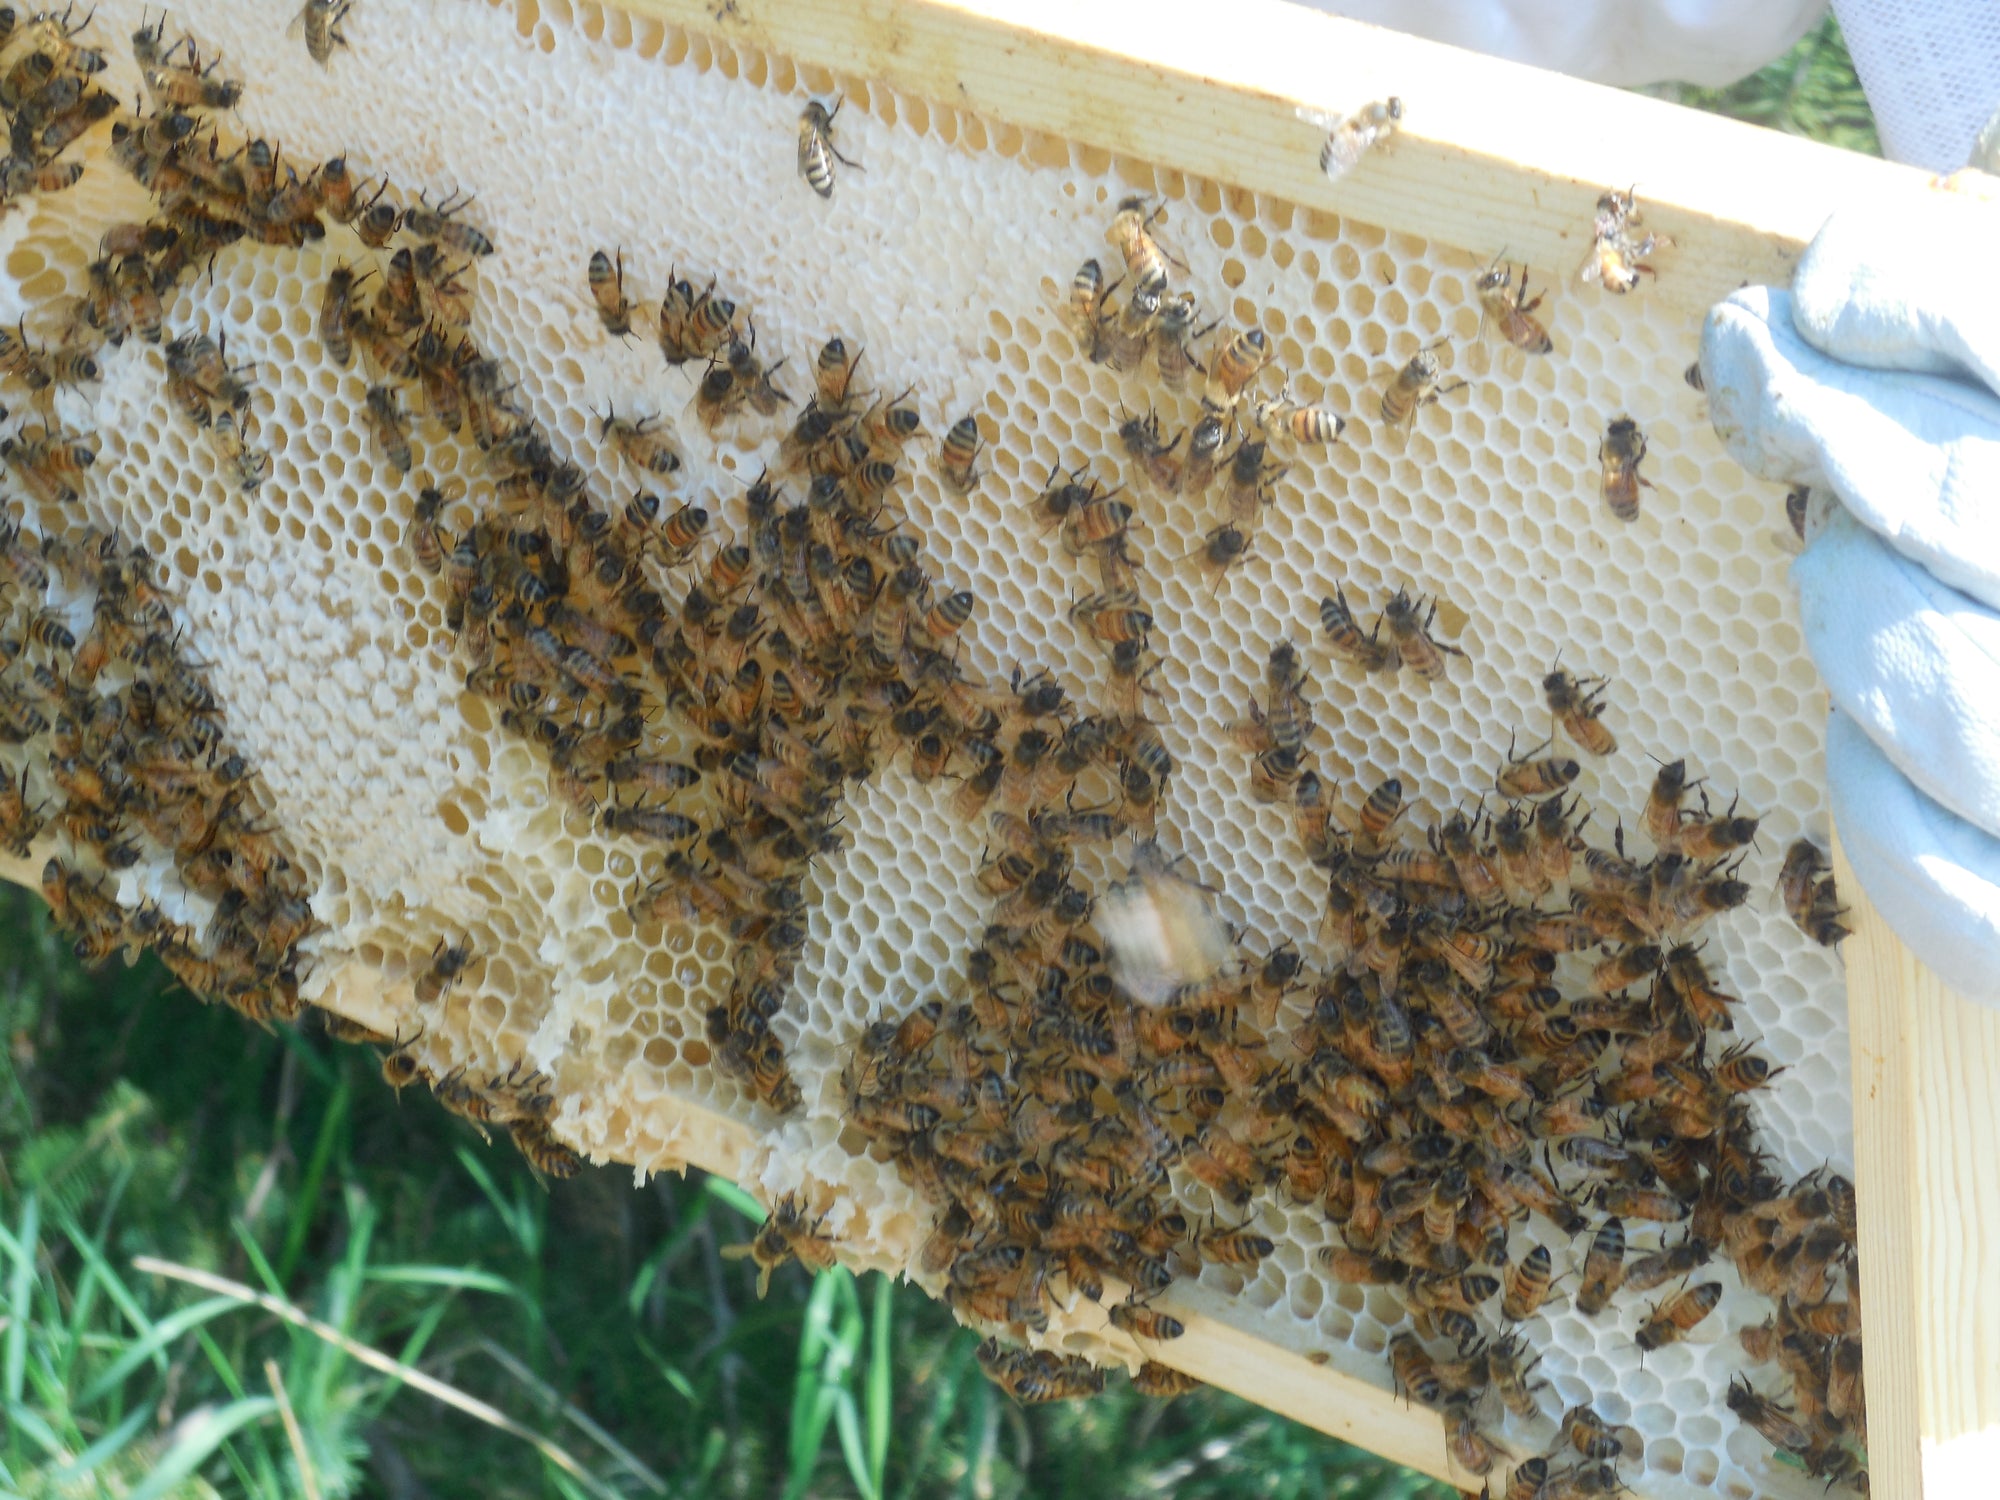 Know when to take honey from your hive